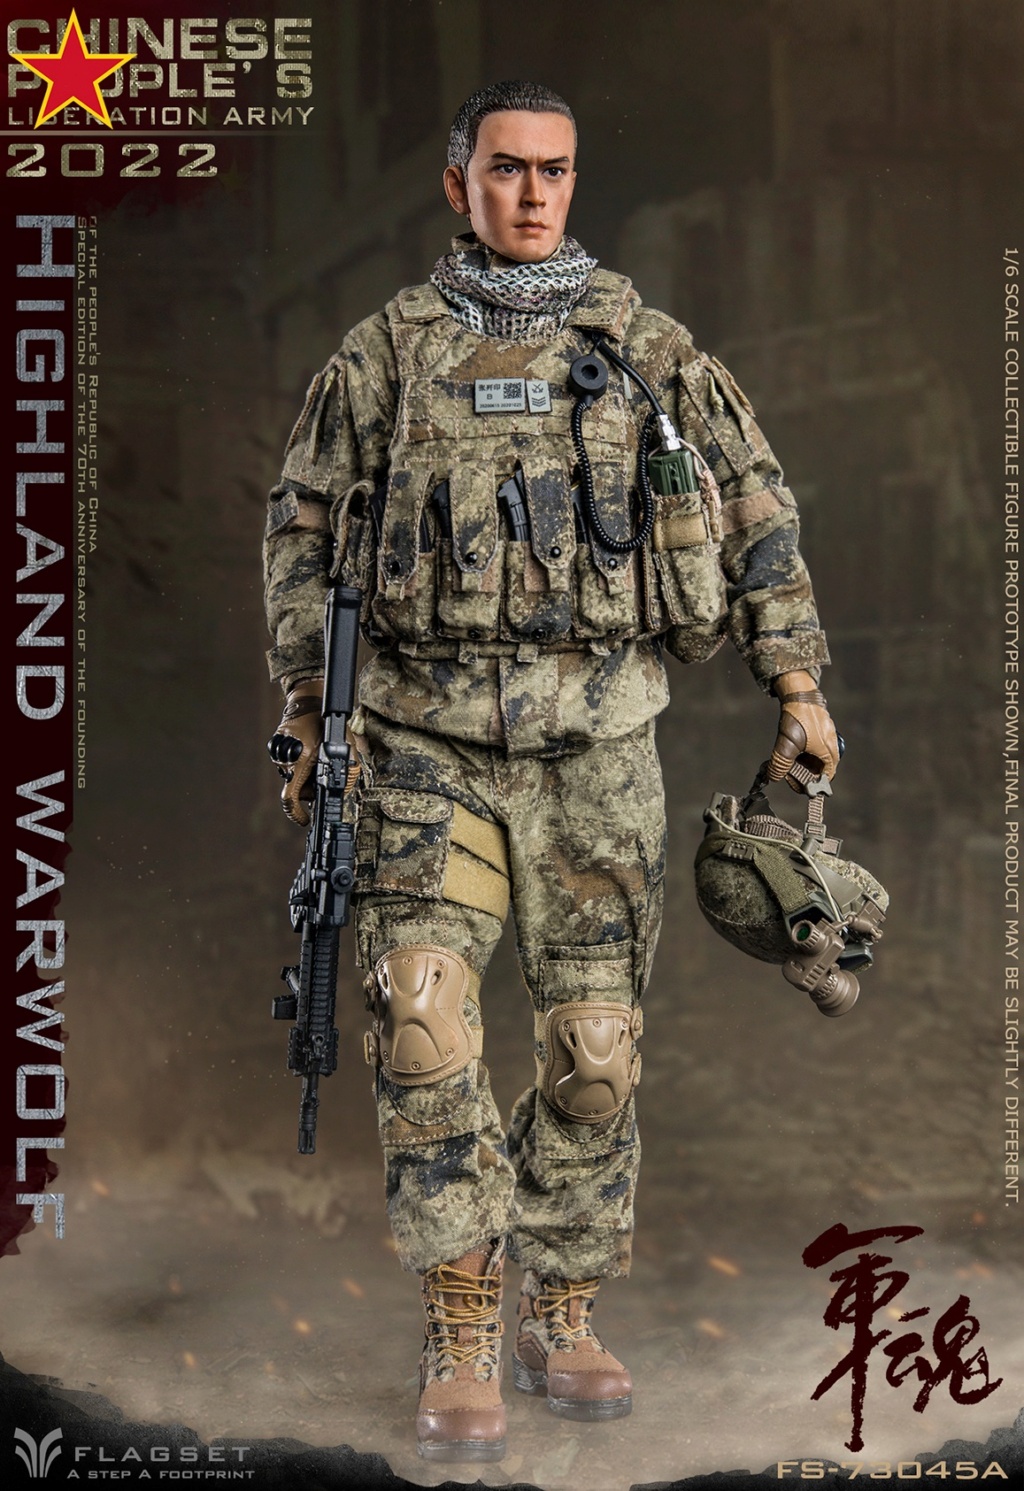 modernmilitary - NEW PRODUCT: Flagset: 1/6 People's Chinese Liberation Army Series - Highland Warwolf /Sniper #FS-73045A/B 12545810